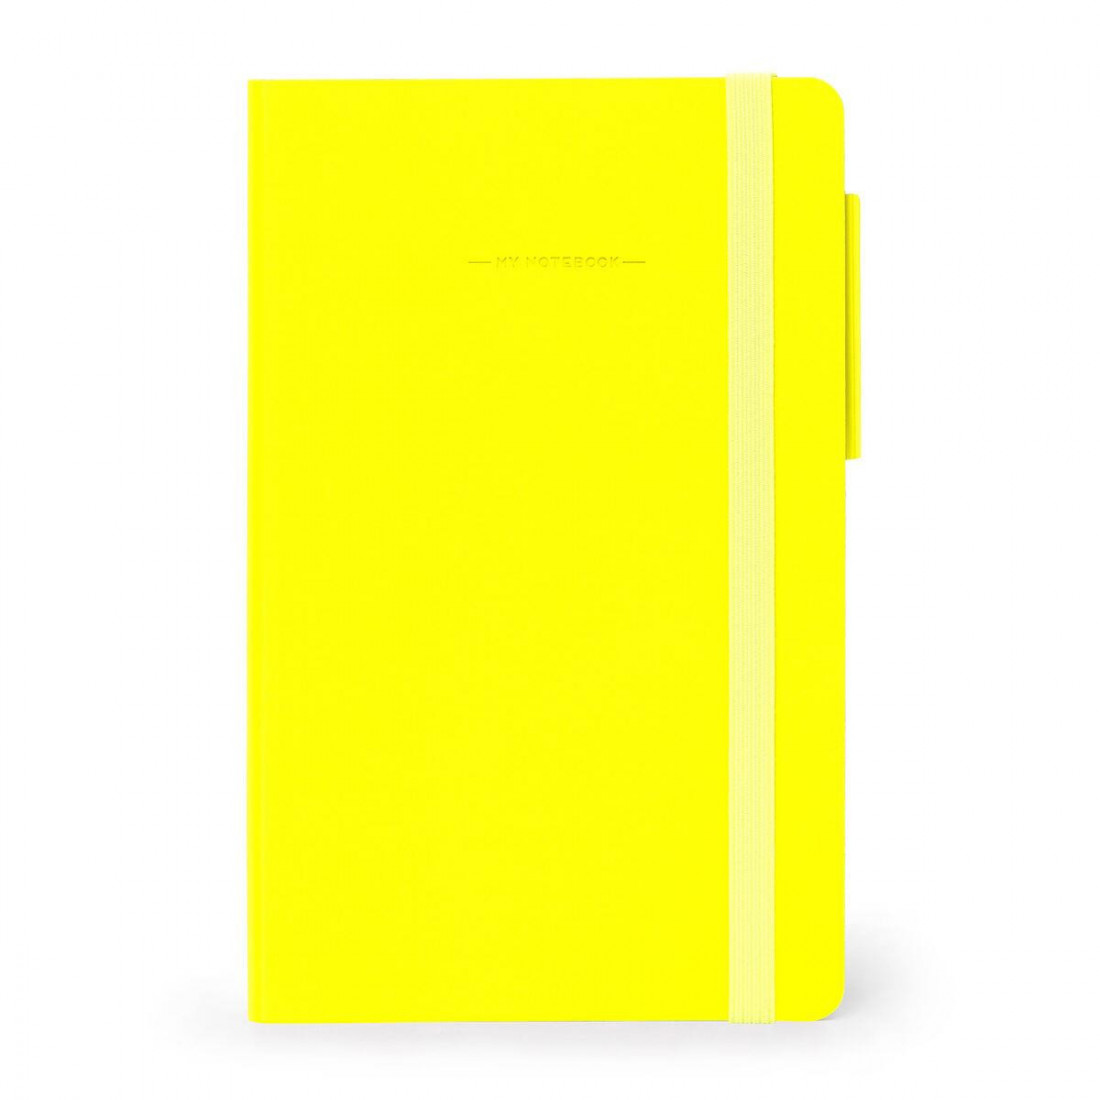 My Notebook - Lined - Medium - Neon Yellow Cover LEGAMI